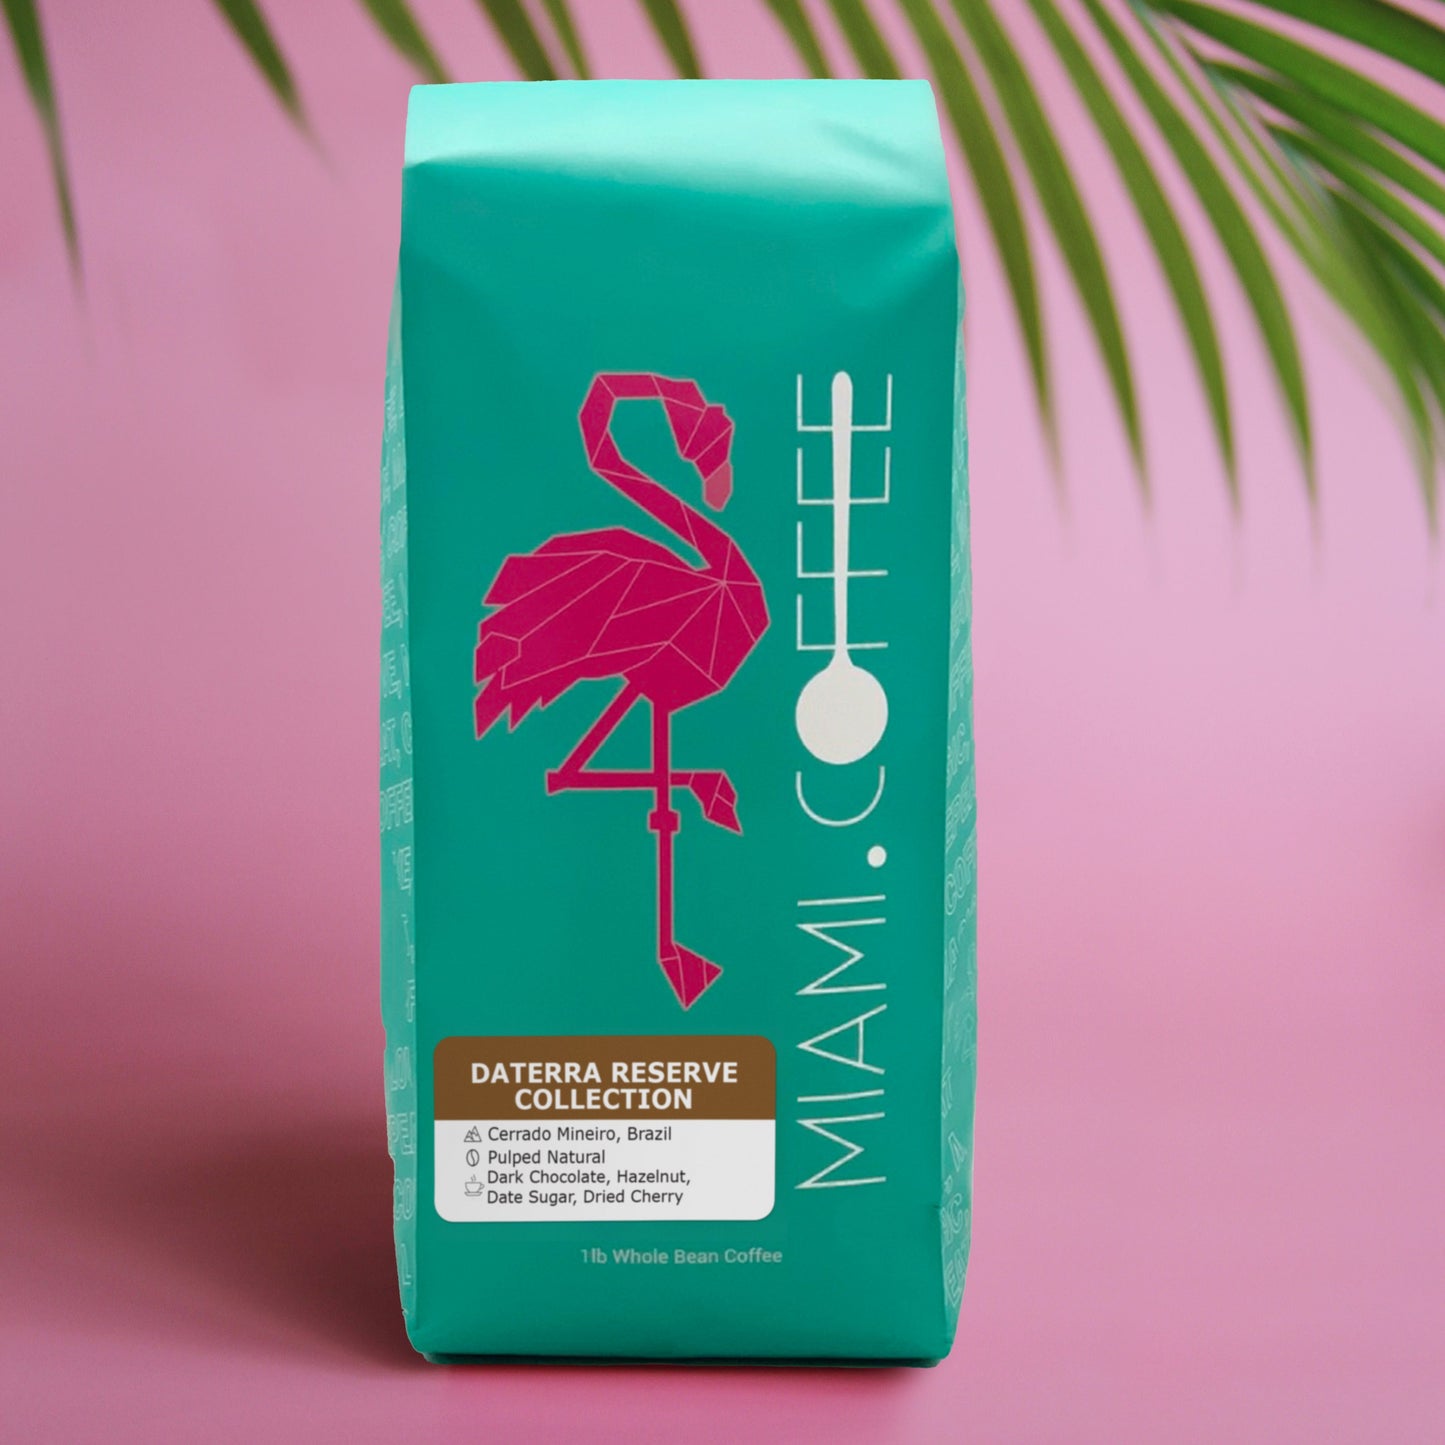 1 pound bag of Miami dot Coffee Daterra Reserve Collection from Cerrado Mineiro, Brazil, Pulped Natural Process, Tasting Notes of Dark Chocolate, Hazelnut, Date sugar, Dried cherry